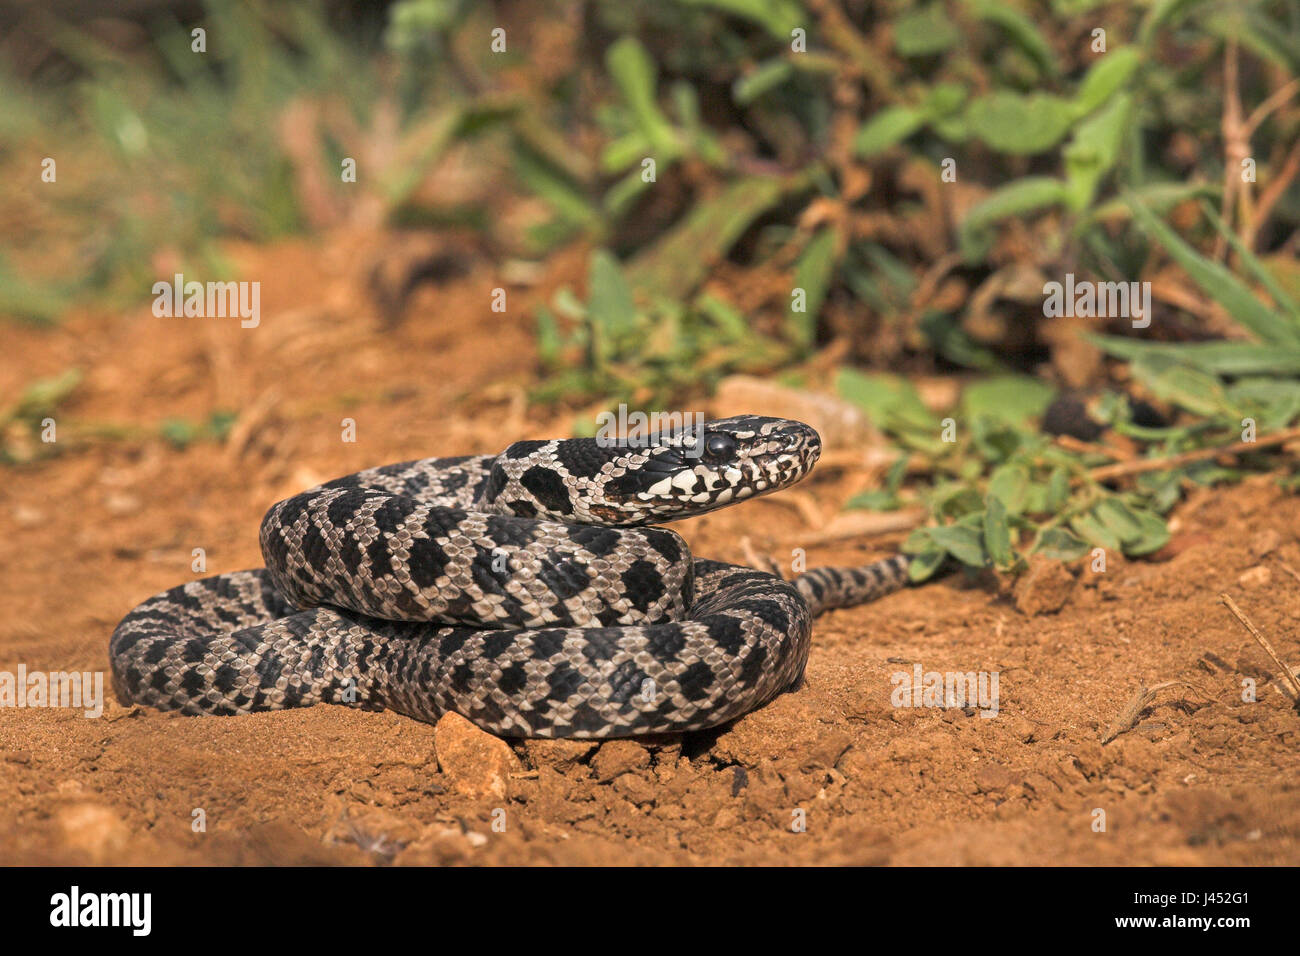 photo of a juvenile fourllined snake on the ground Stock Photo